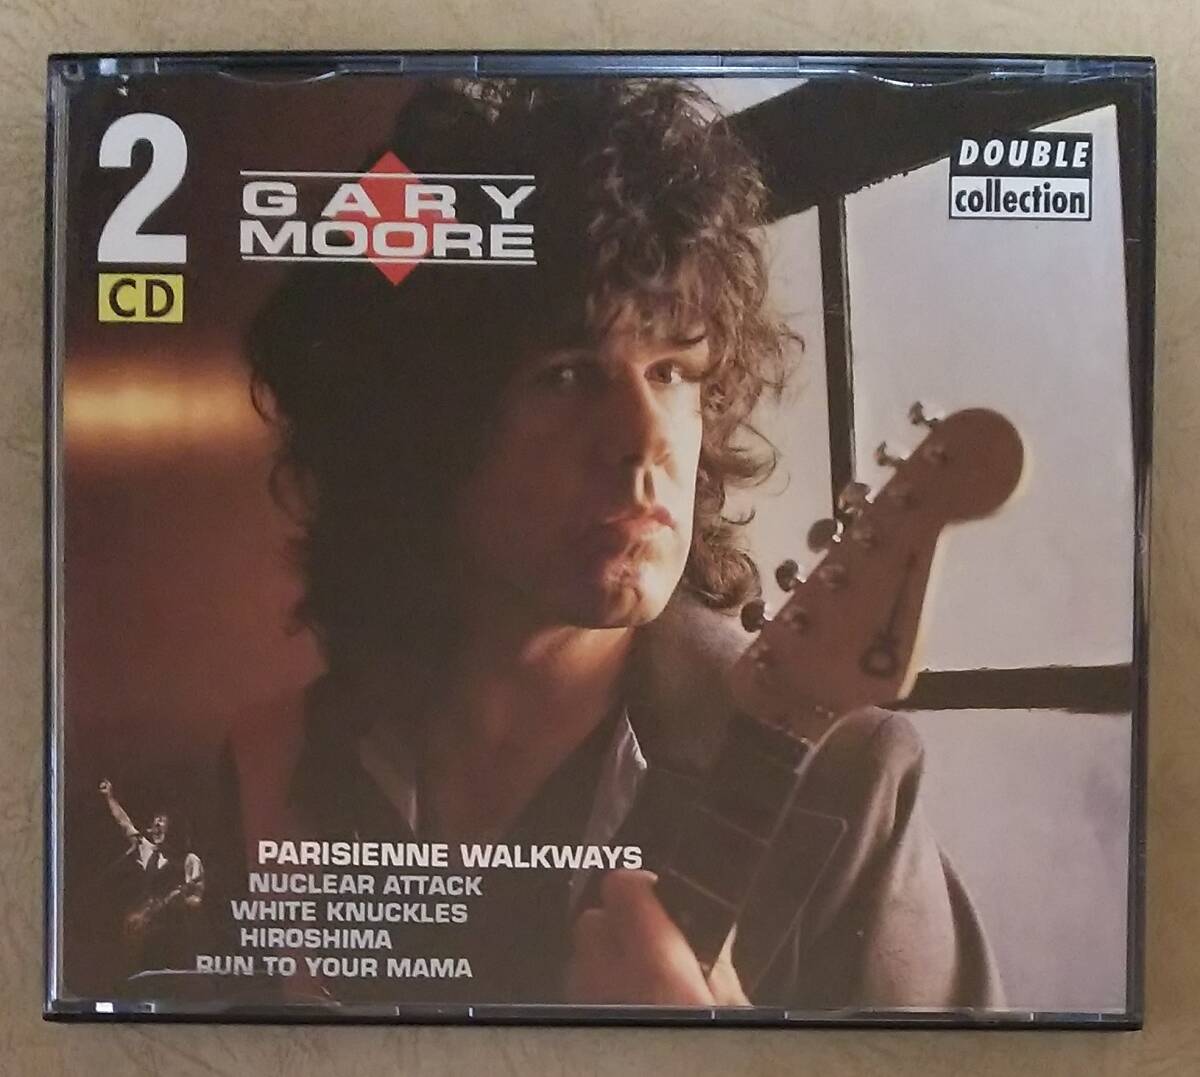 【HM/HR】 GARY MOORE(ゲイリー・ムーア) / DOUBLE COLLECTION:PARISIENNE WALKWAYS(ダブル・コレクション パリの散歩道)　輸入盤　2枚組CD_画像1